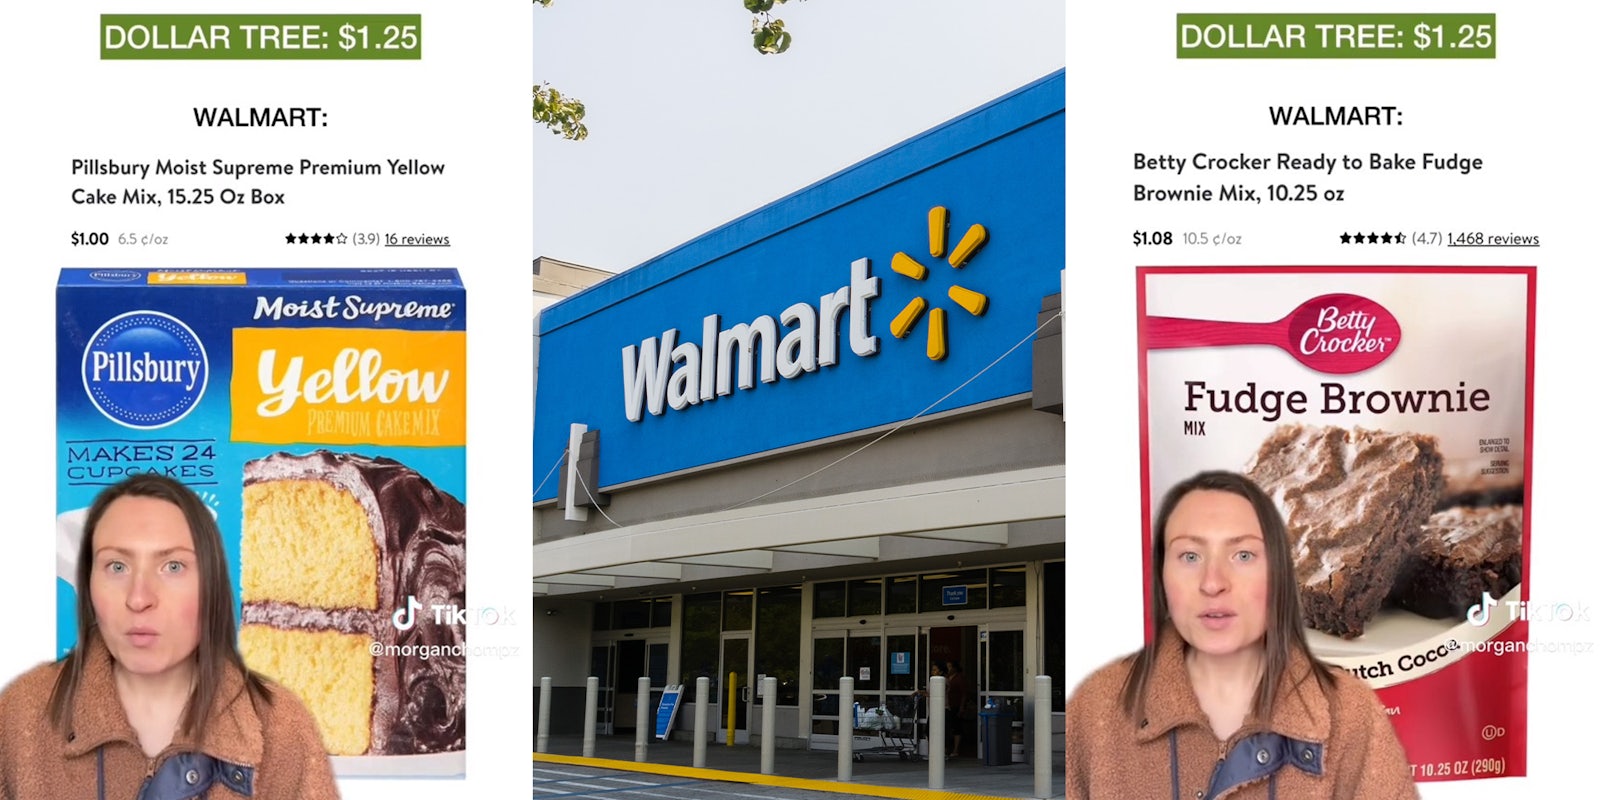 Woman compares items at Walmart that are cheaper than Dollar Tree